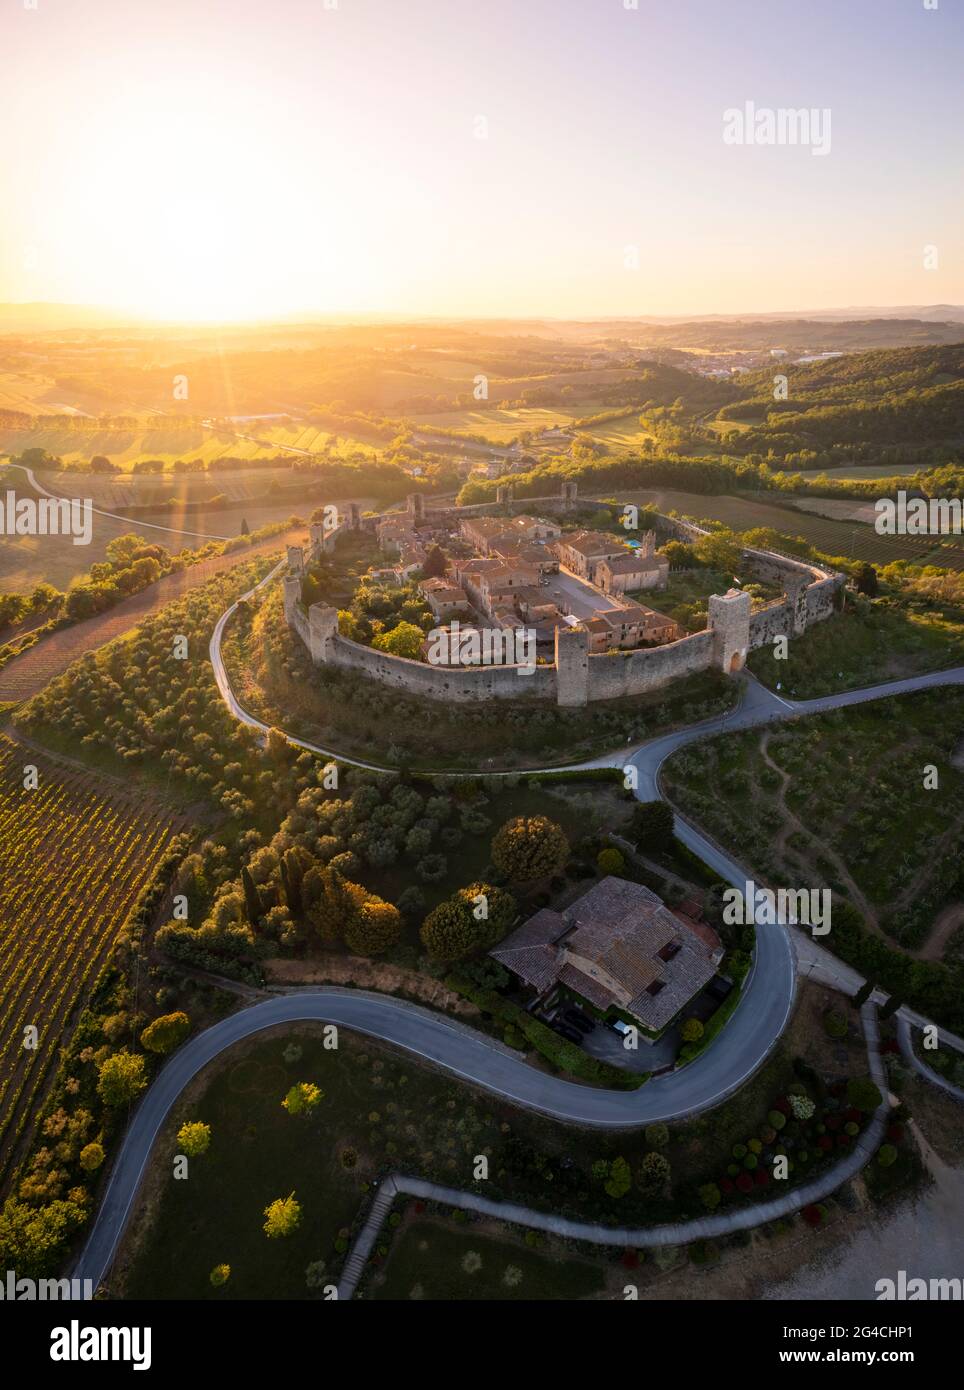 Aerial view of the medieval town of Monteriggioni at sunset. Monteriggioni, Siena district, Tuscany, Italy. Stock Photo